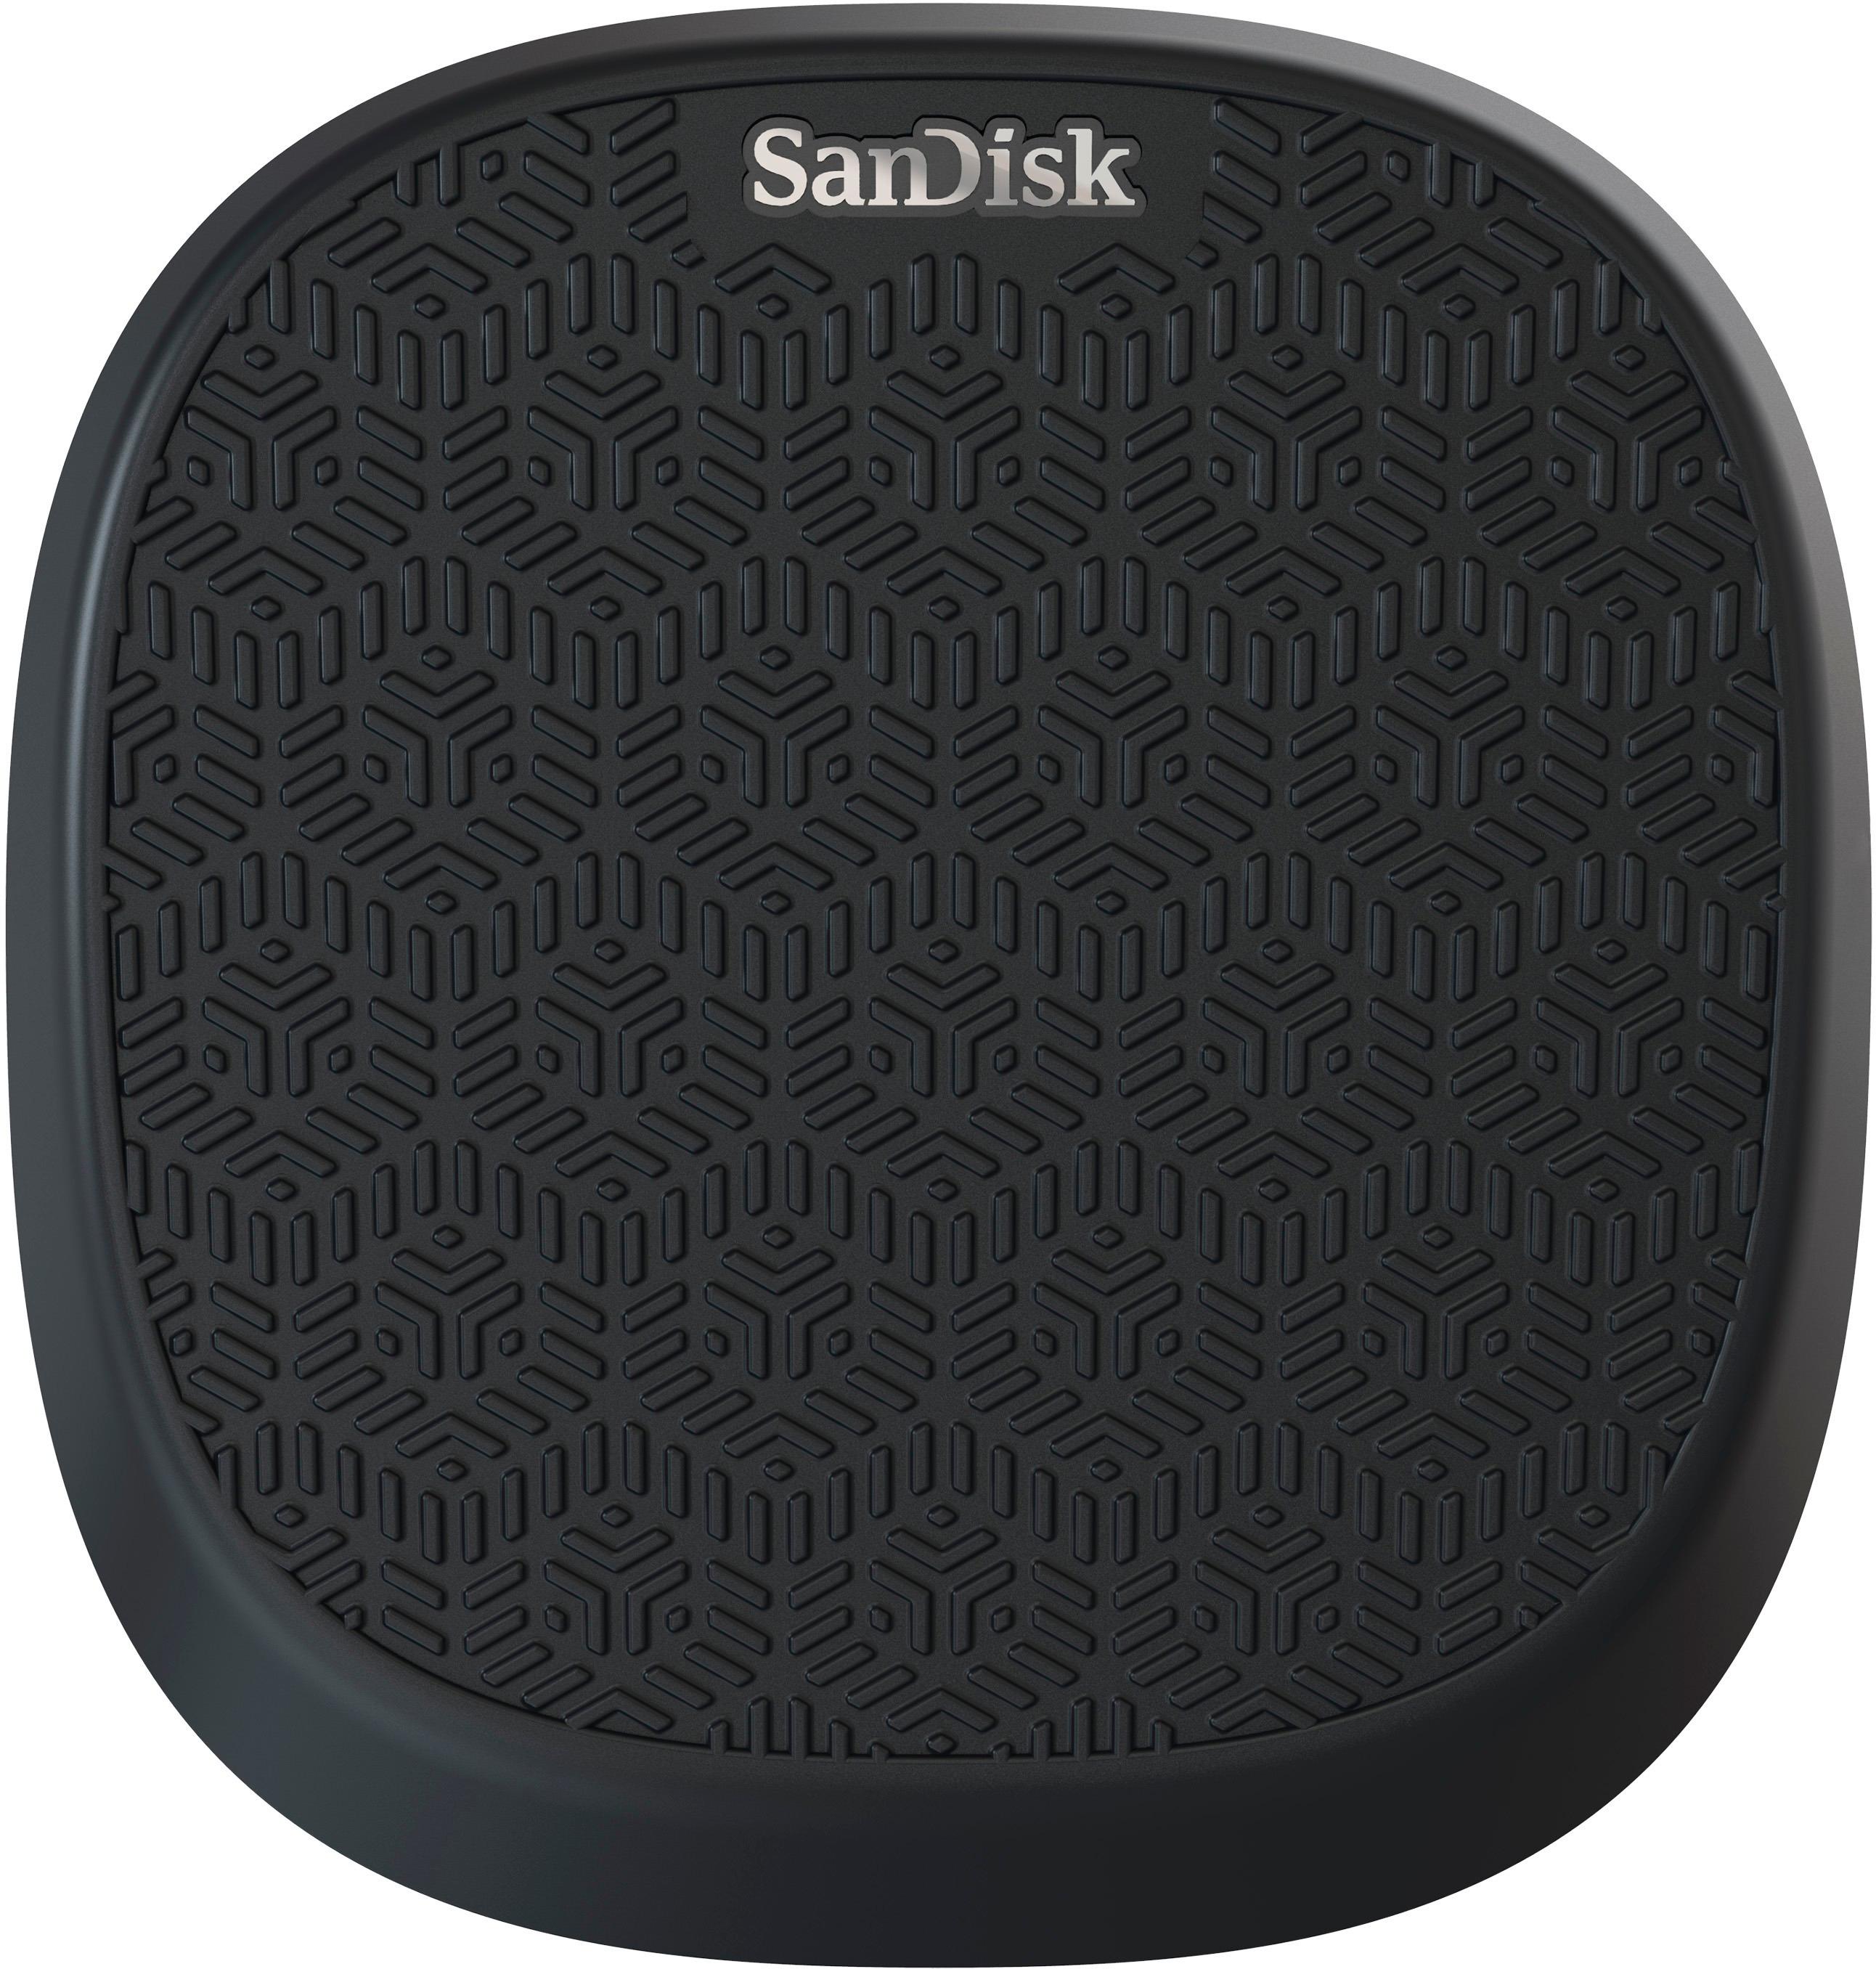 SanDisk - iXpand Base 128GB iPhone Charger and Backup - Black